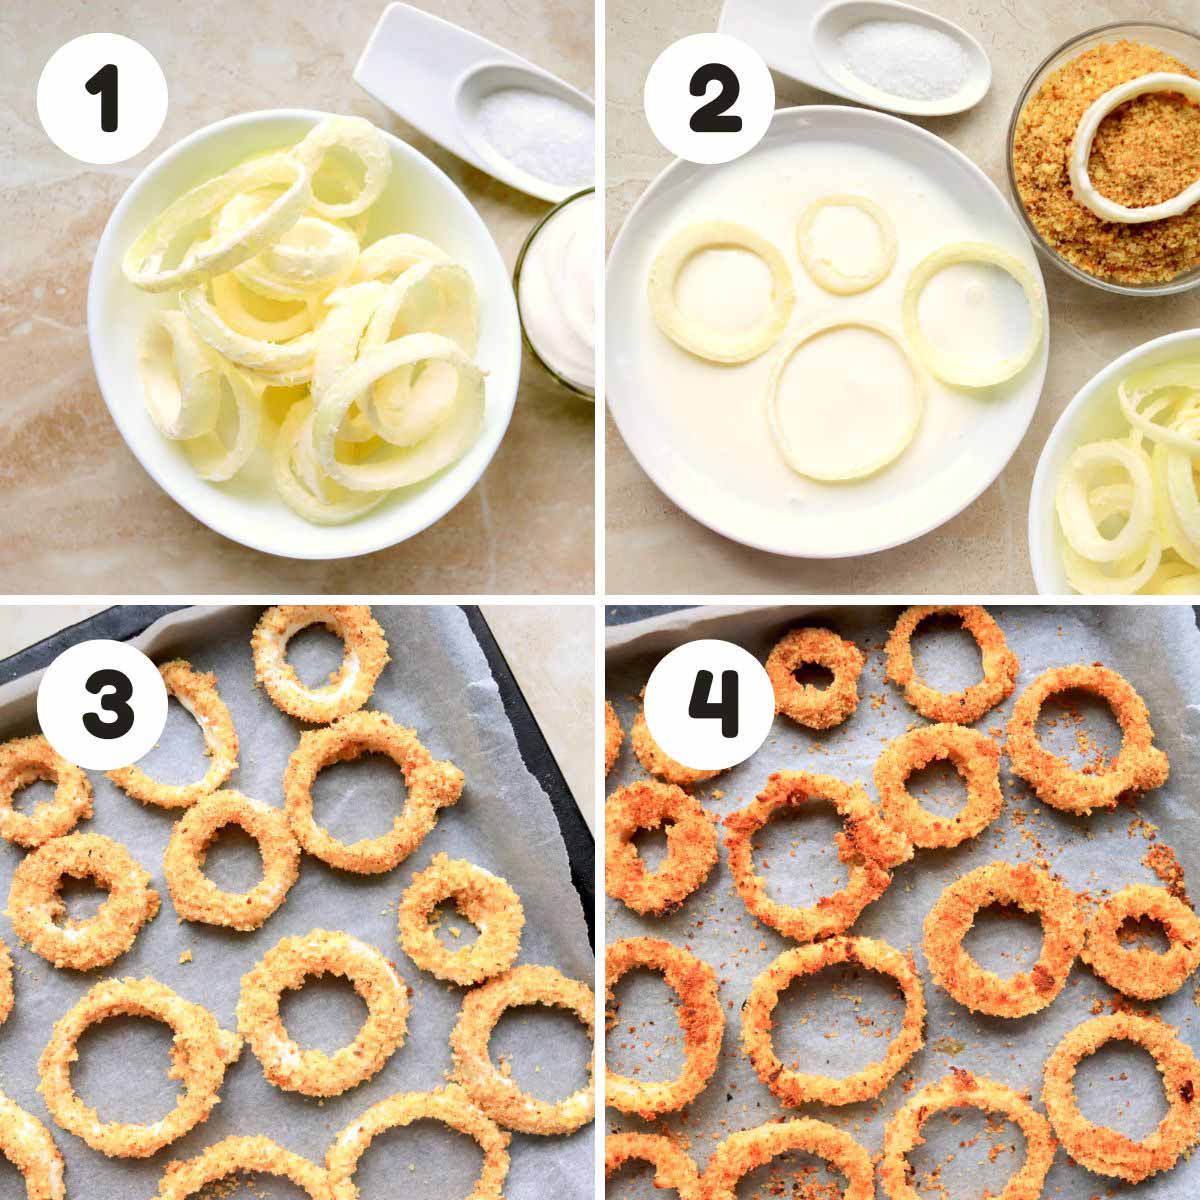 Steps to make the onion rings.